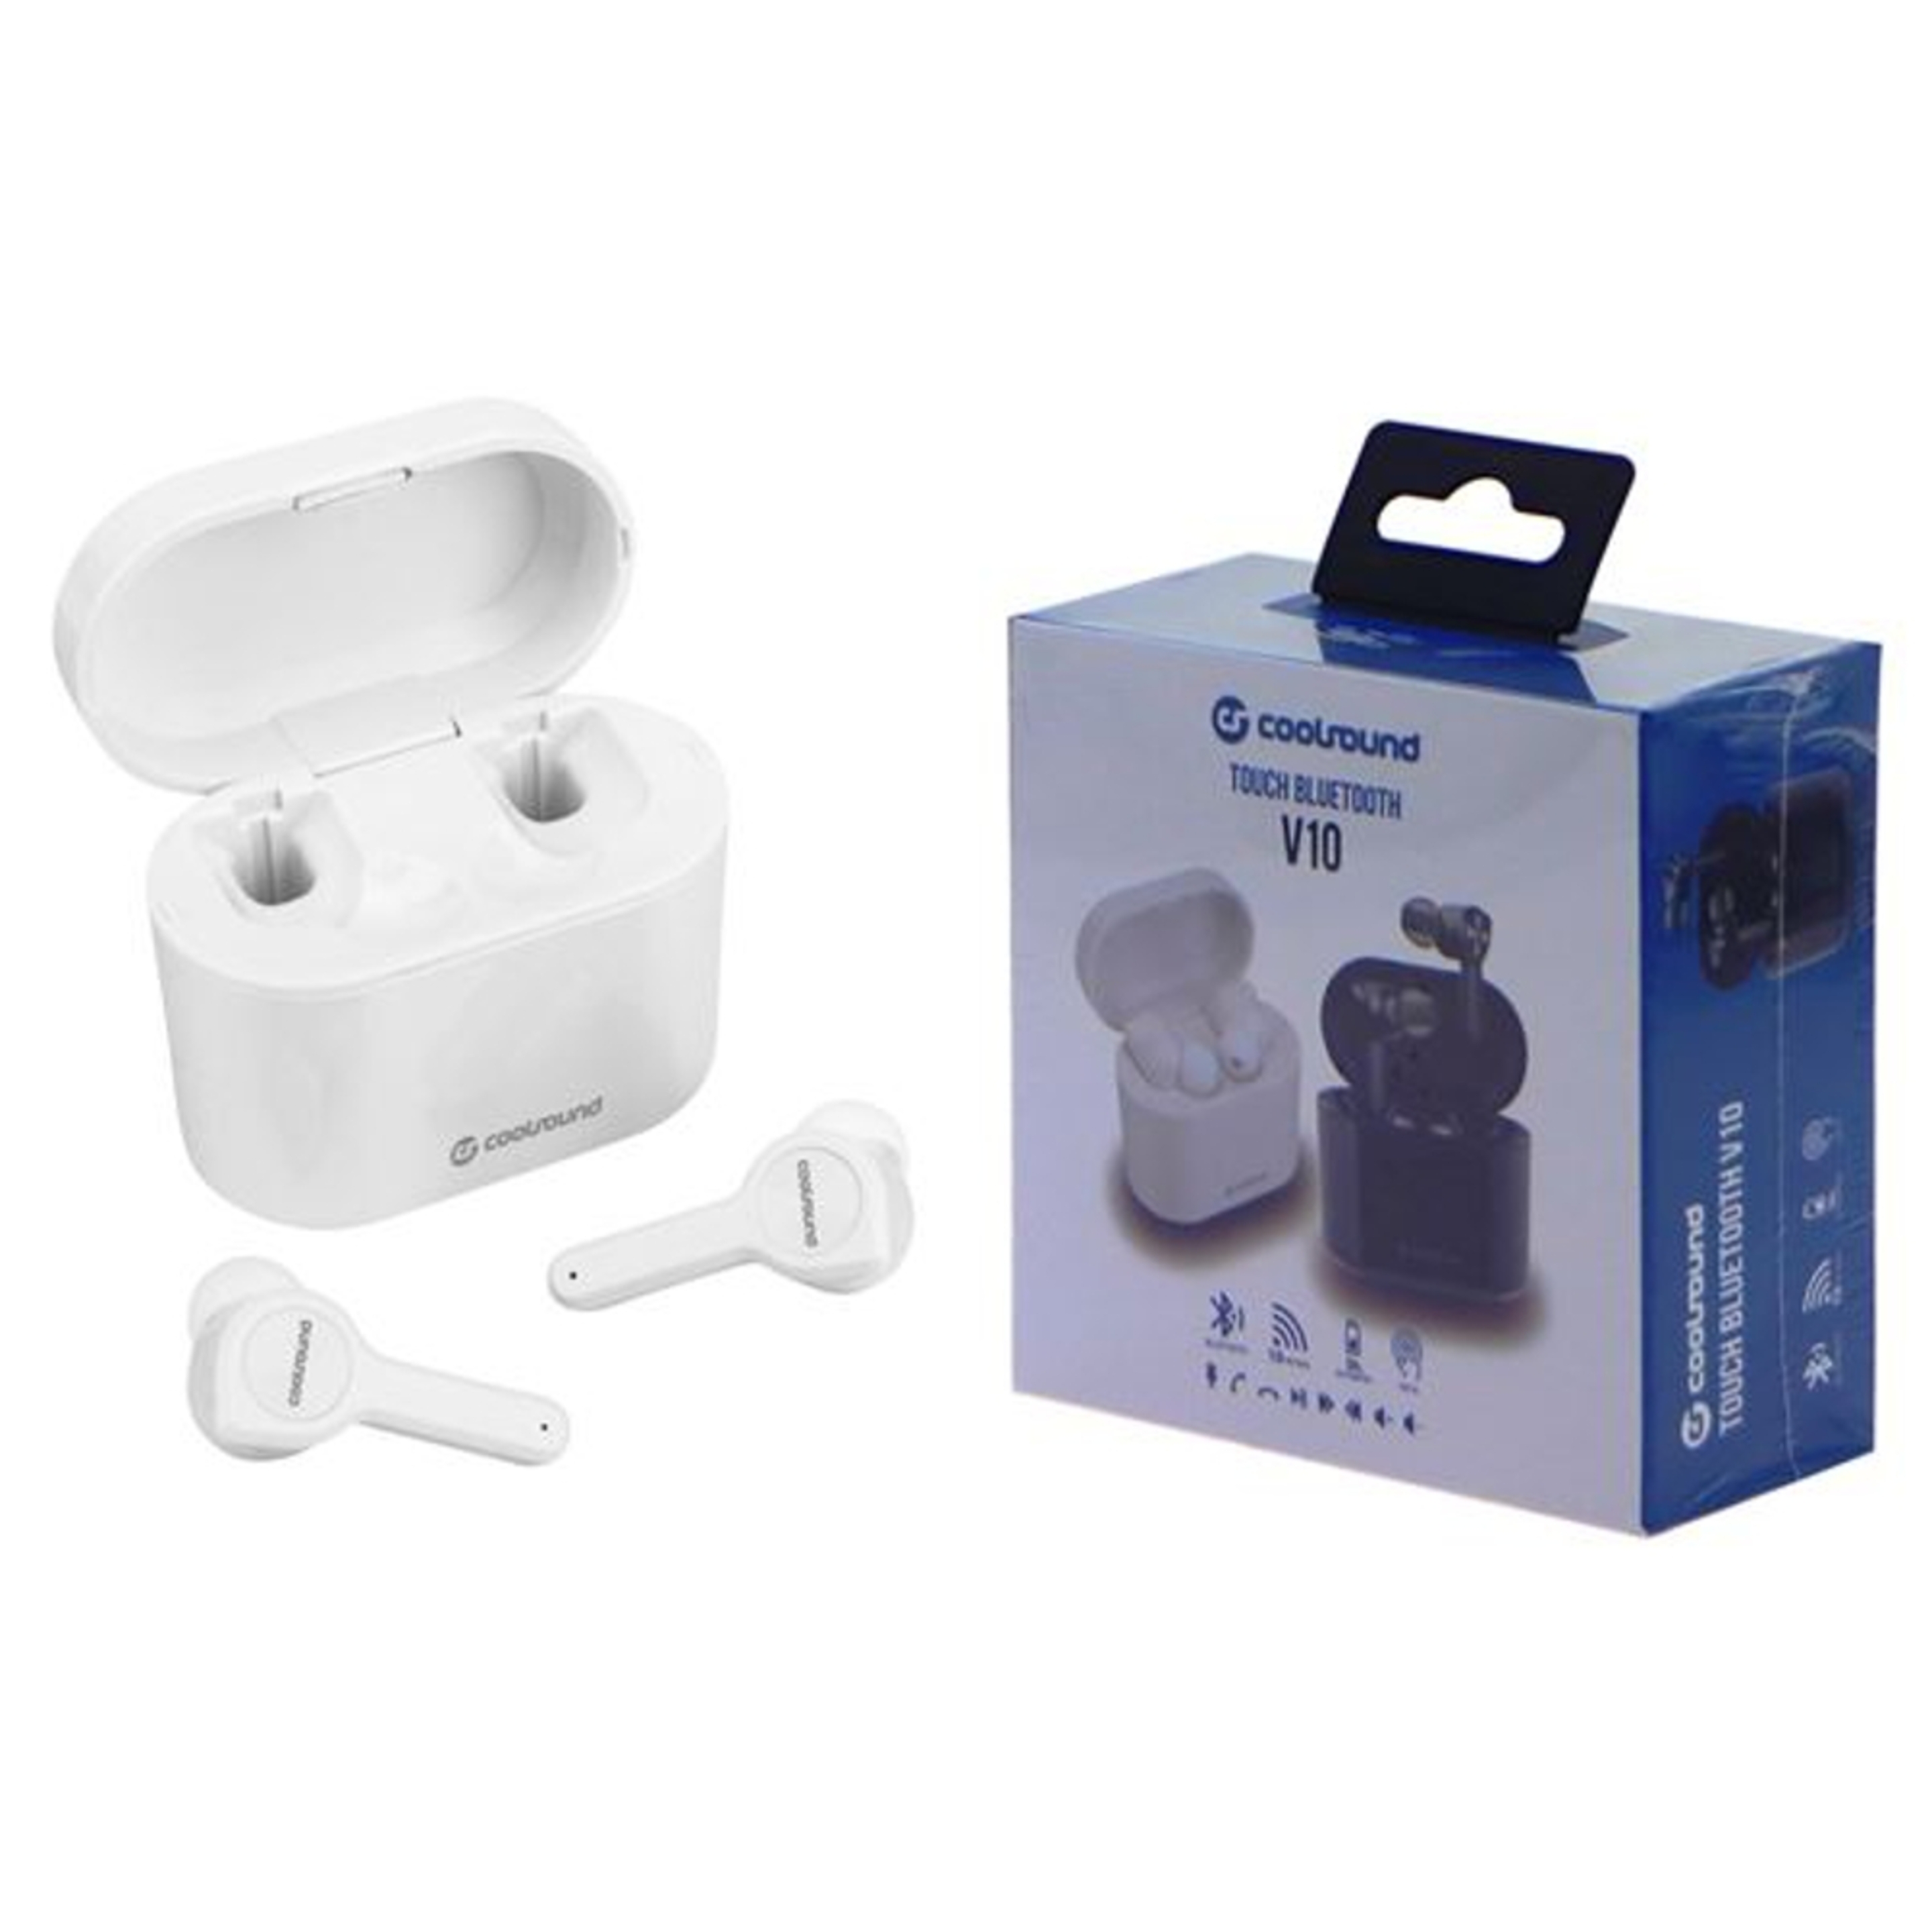 Auriculares Earbuds Tws V10 Touch Bluetooth Blancos Coolsound - Blanco  MKP